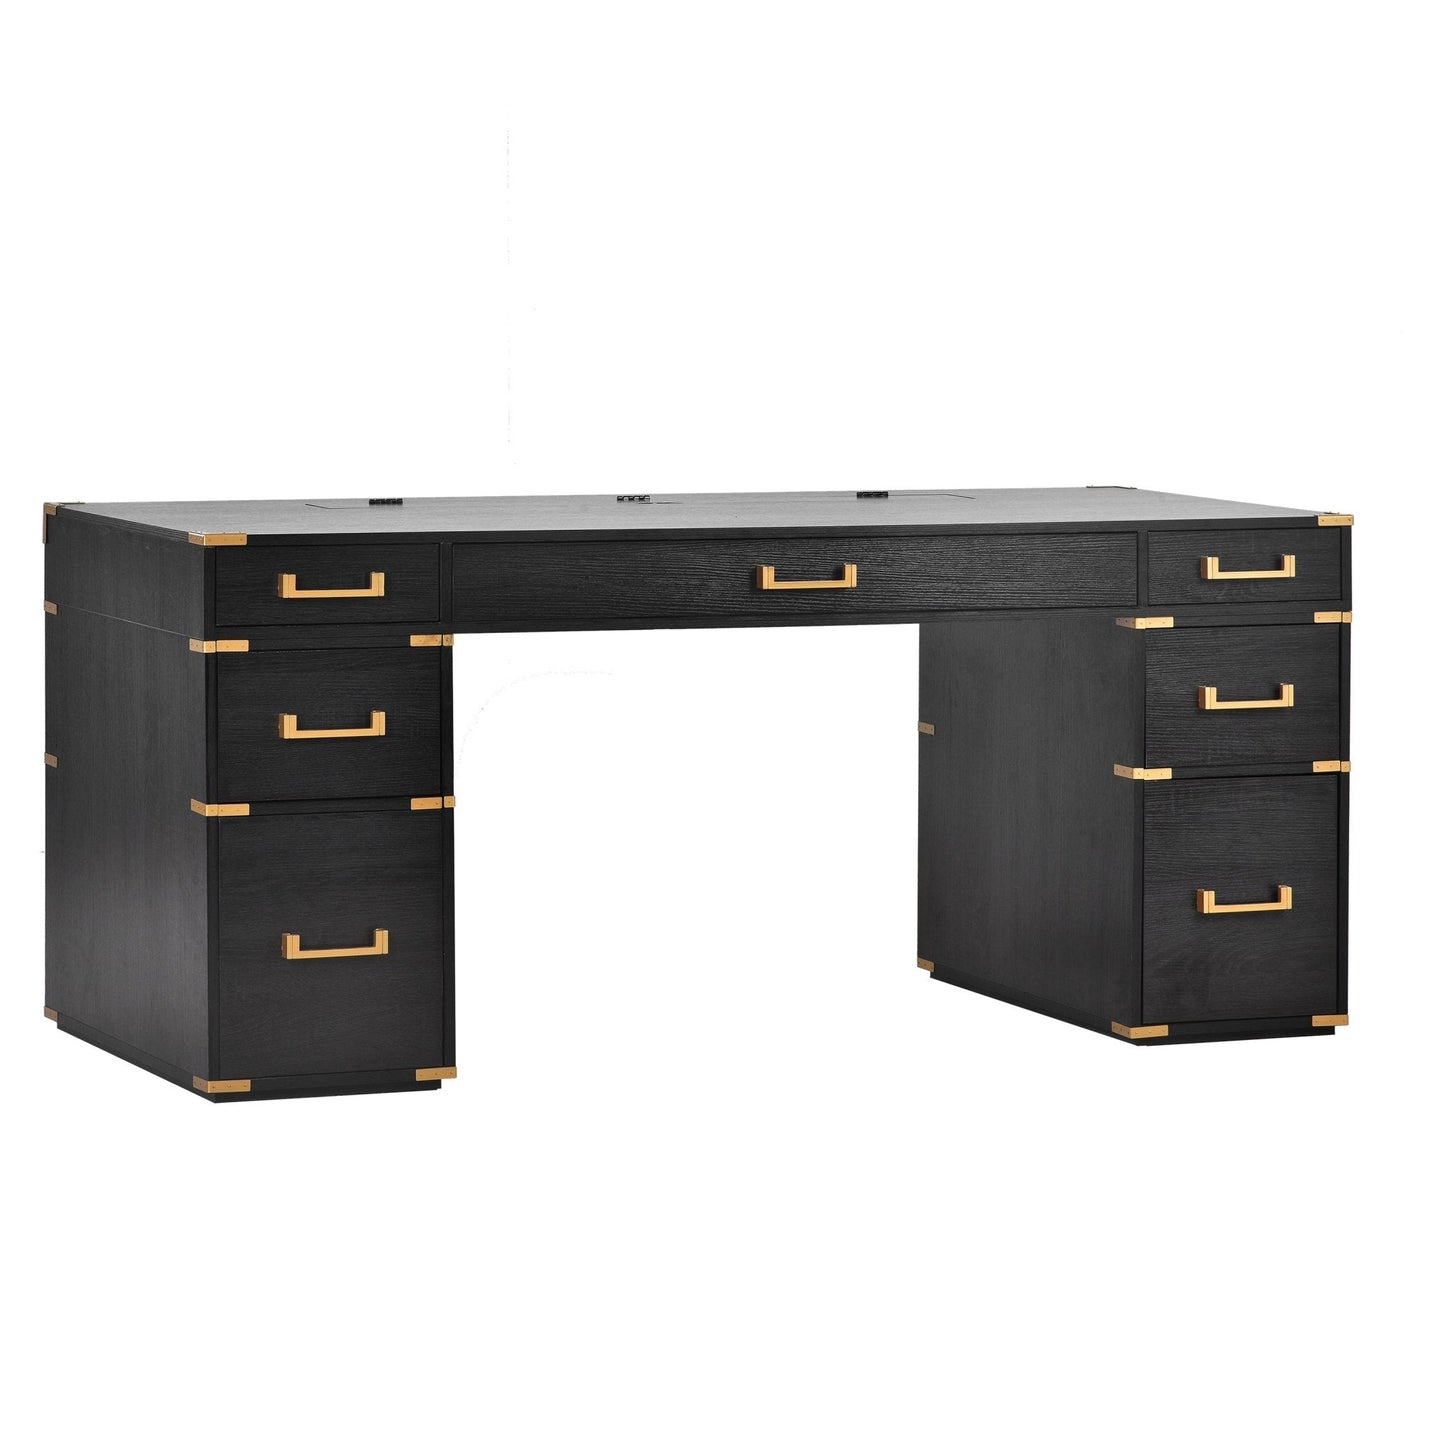 70"Classic and Traditional Executive Desk with Metal Edge Trim ,Writing Desk with 2 file drawers,USB Ports and Outlets,Desk with Hidden Compartment for Living Room,Home Office,Study Room,Black